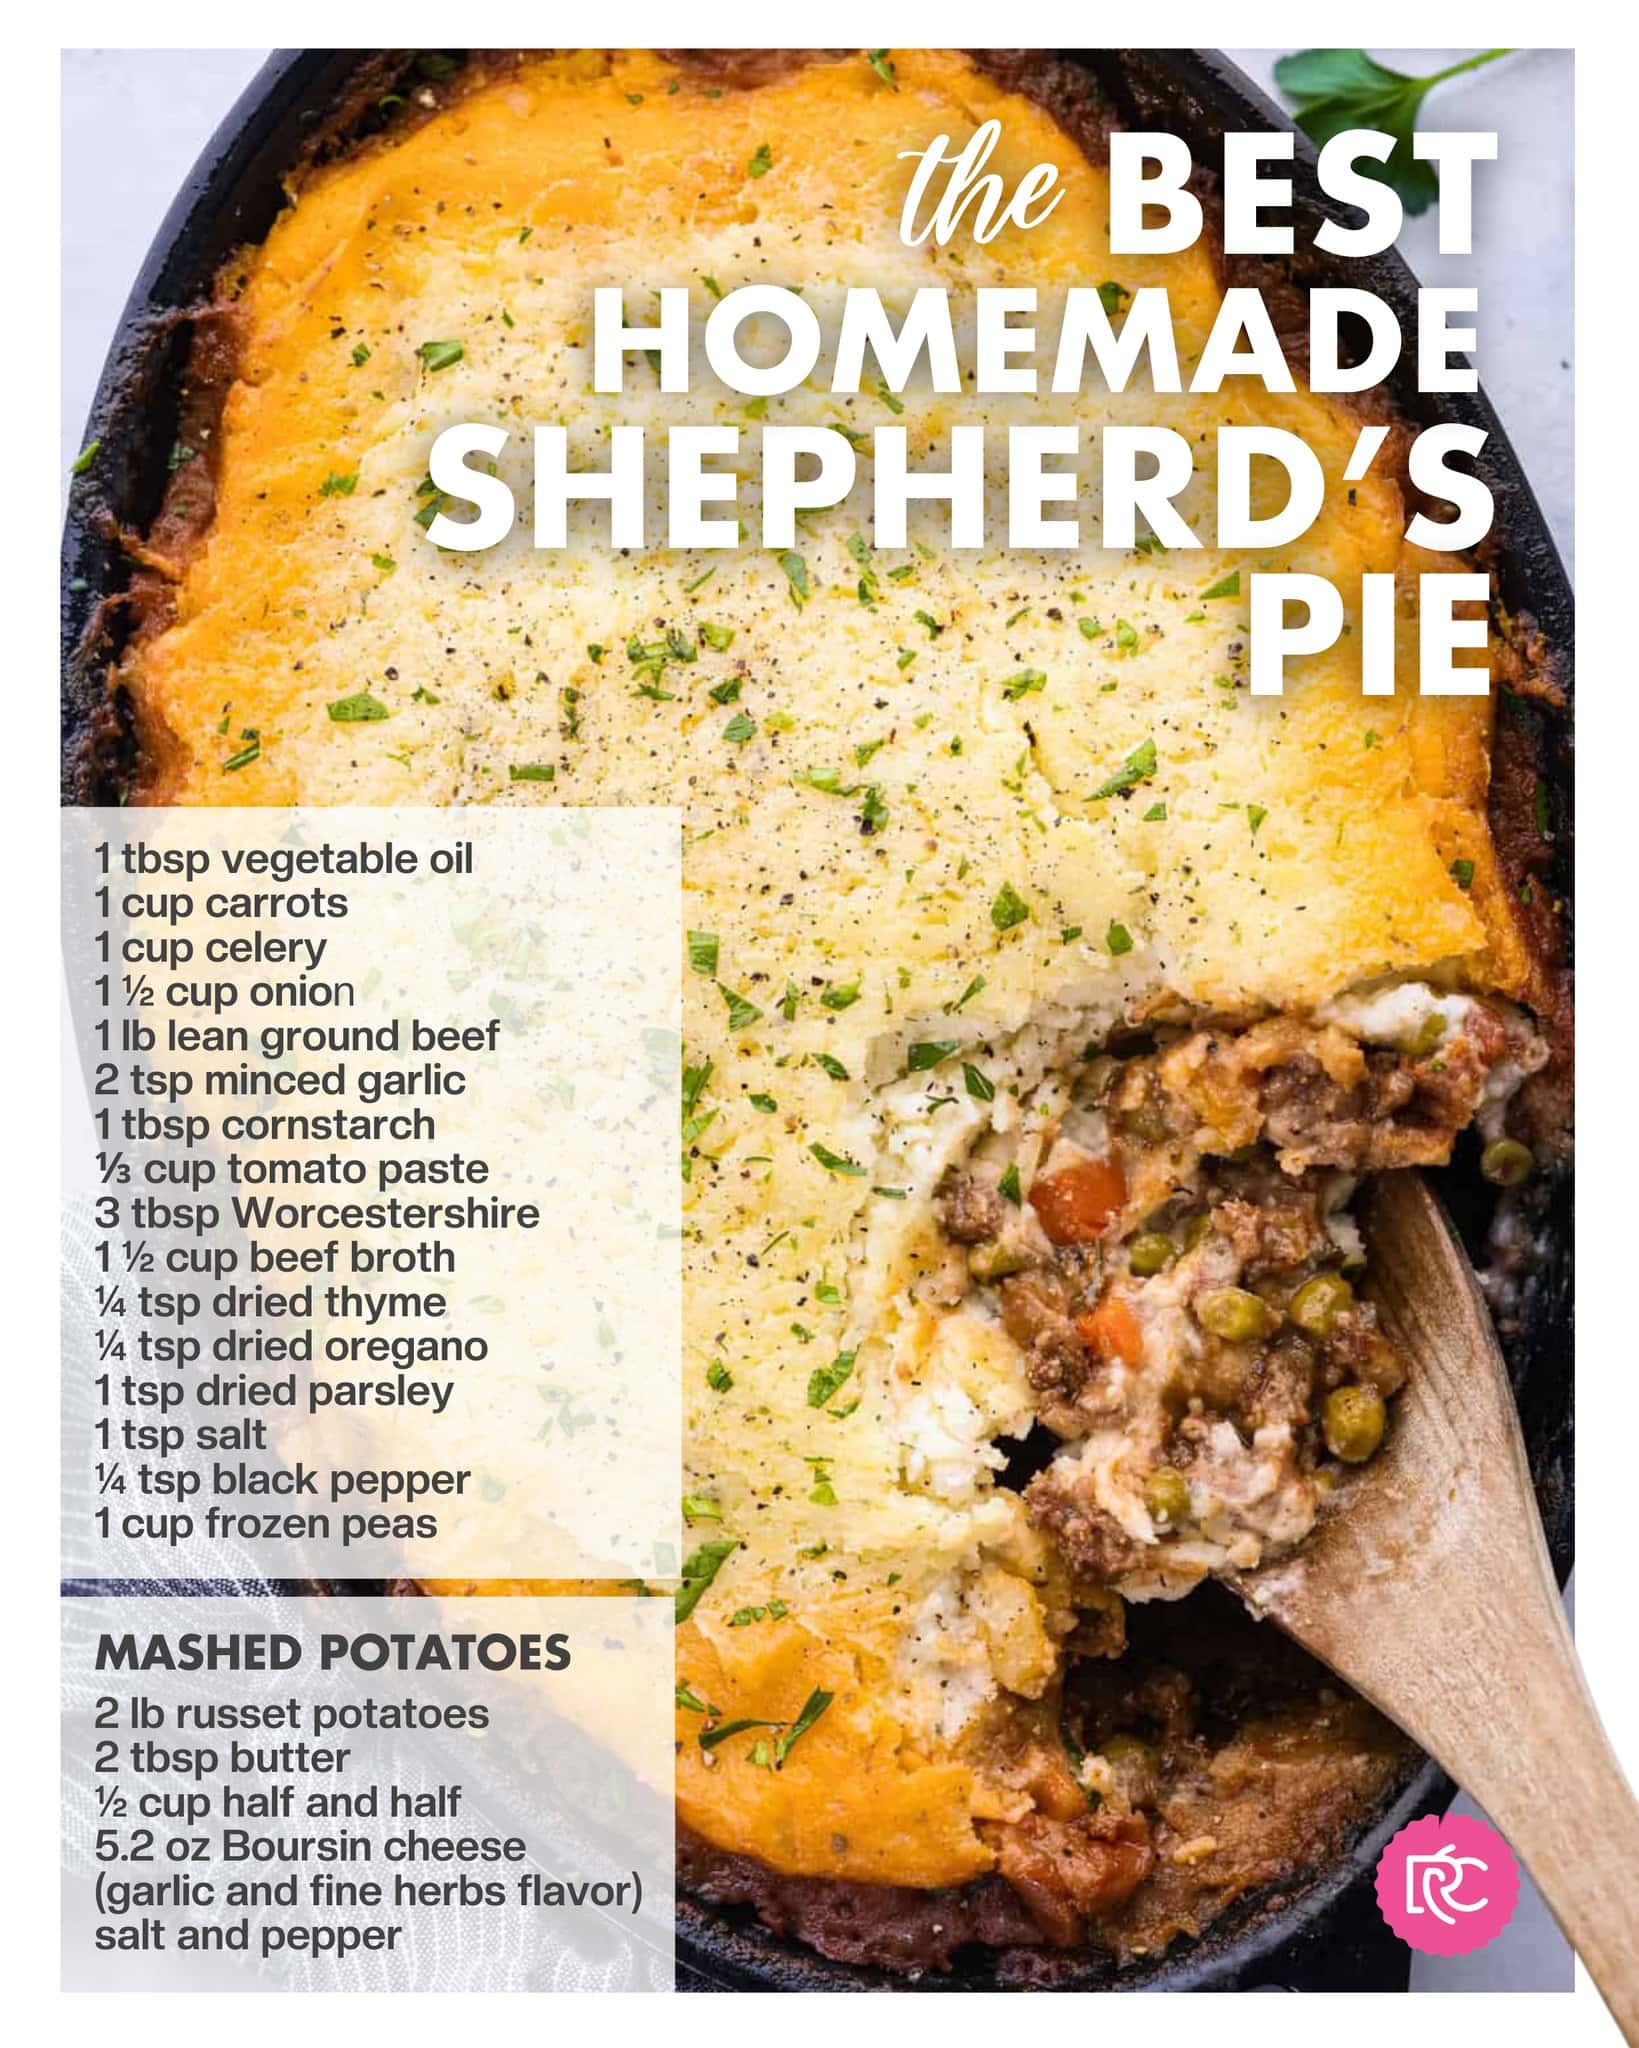 Image of a homemade shepherd's pie in a baking dish, with a section text overlay listing ingredients including meat, vegetables, and mashed potatoes, topped with cheese and herbs. Ideal for busy families looking for